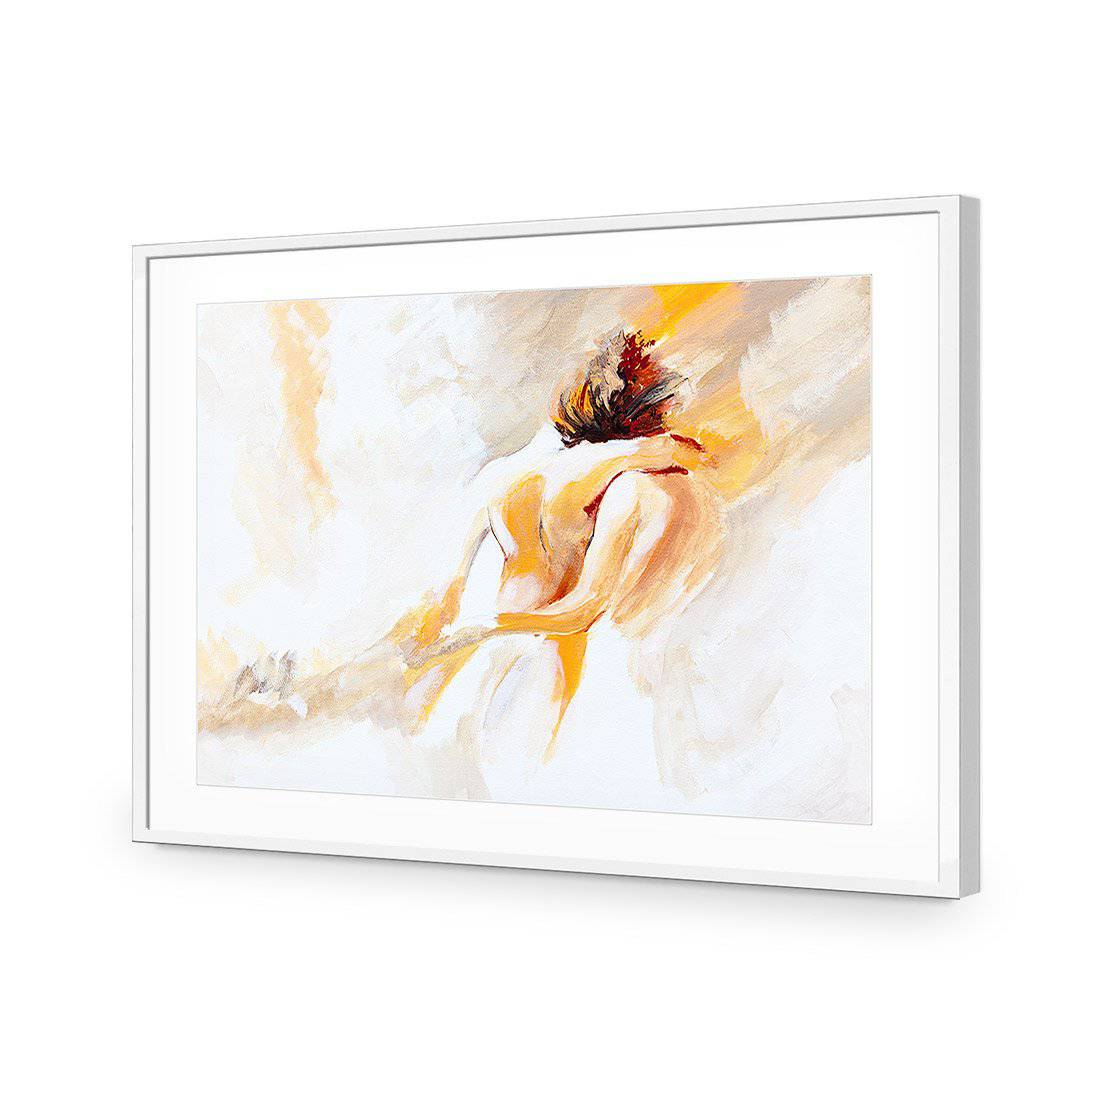 Naked Emotion-Acrylic-Wall Art Design-With Border-Acrylic - White Frame-45x30cm-Wall Art Designs